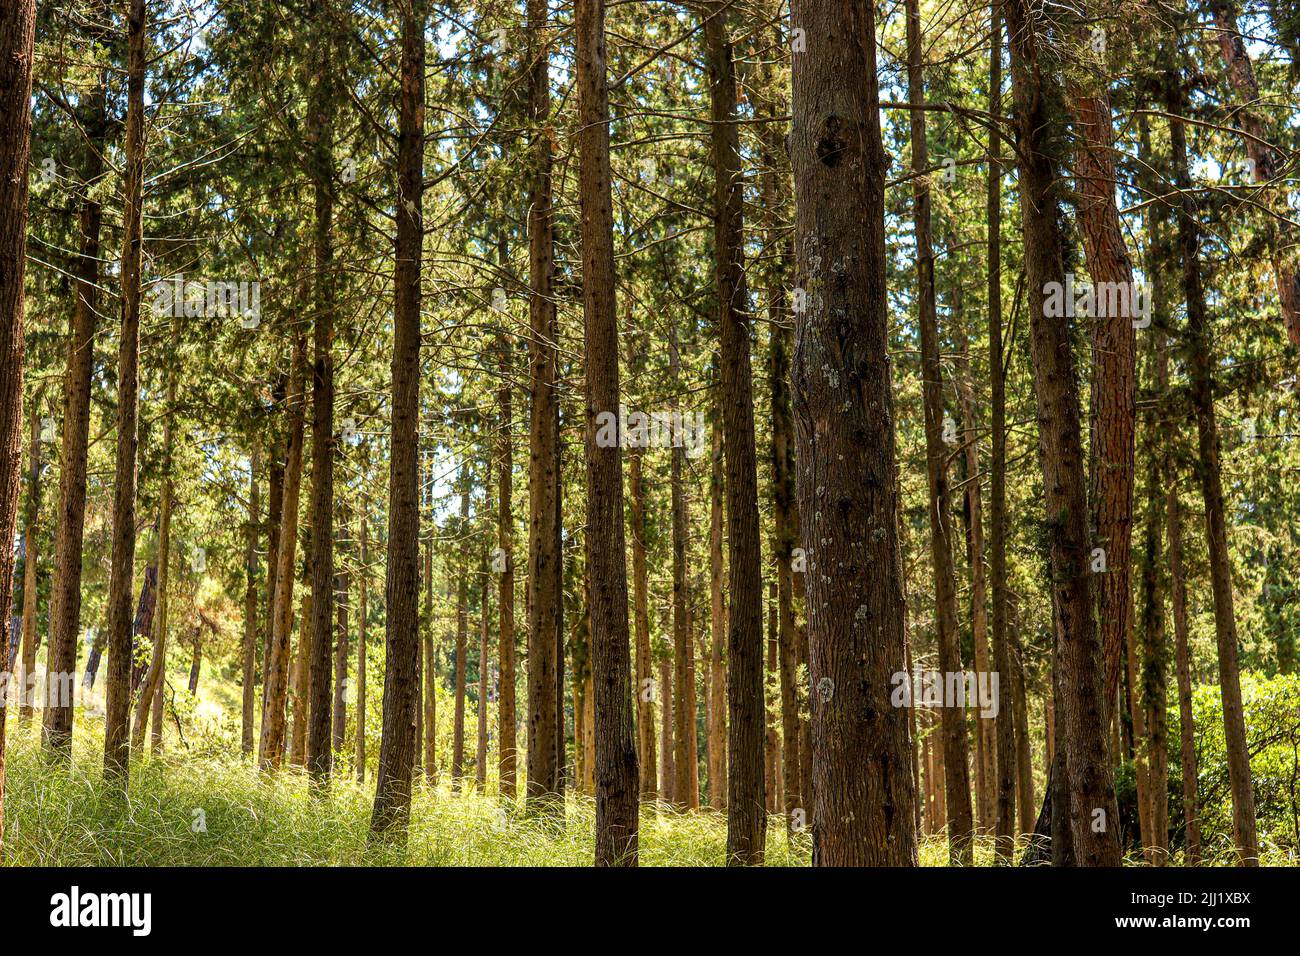 wide-angle perspective forest trees midday Stock Photo